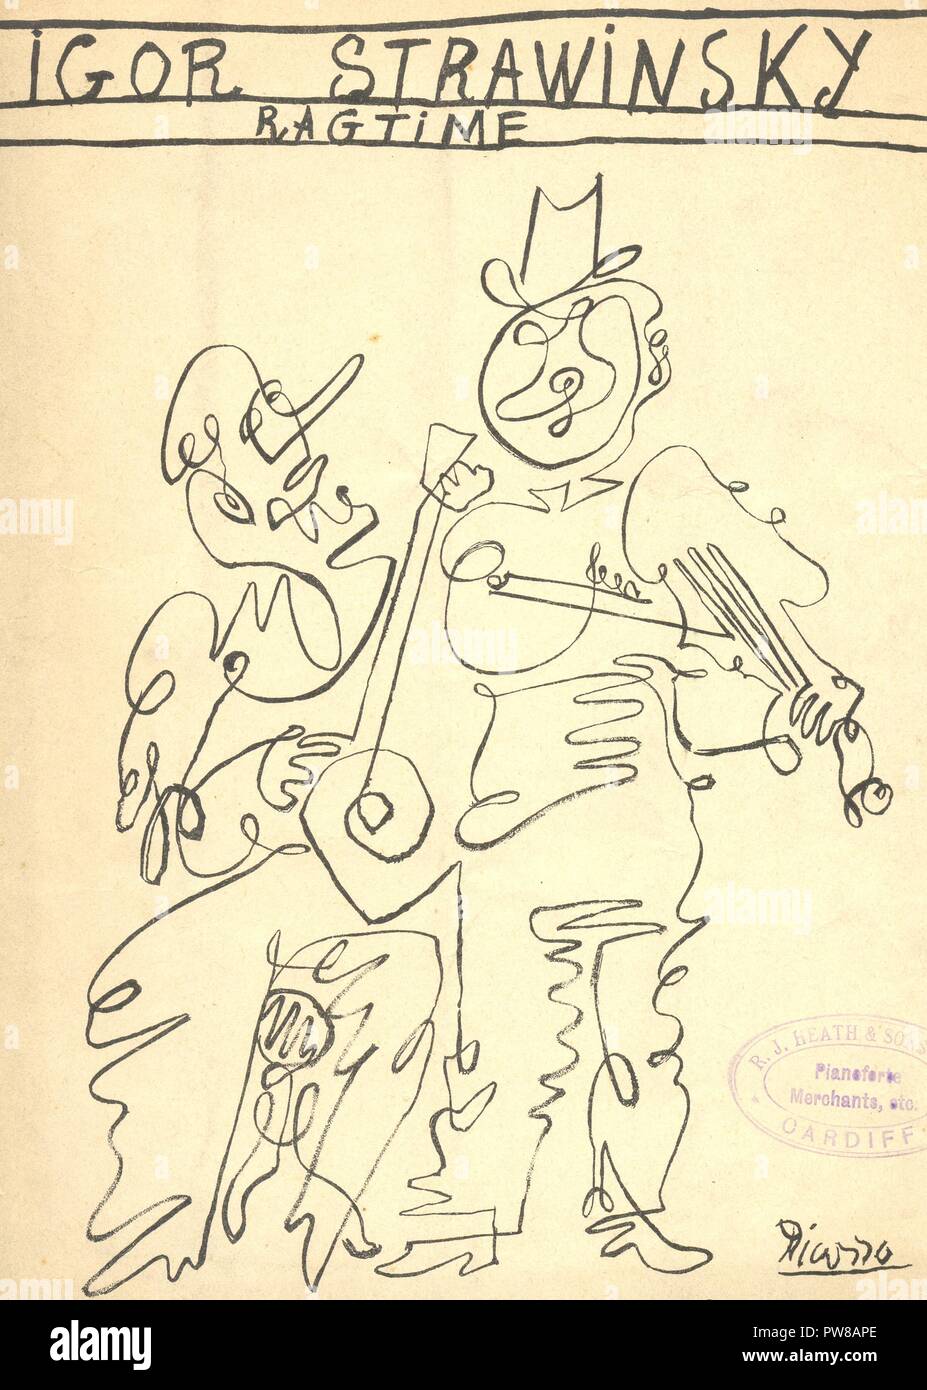 Sheet music cover for Igor Strawinsky (sic) Ragtime illustrated with sketch  of two players by Picasso 1919 Stock Photo